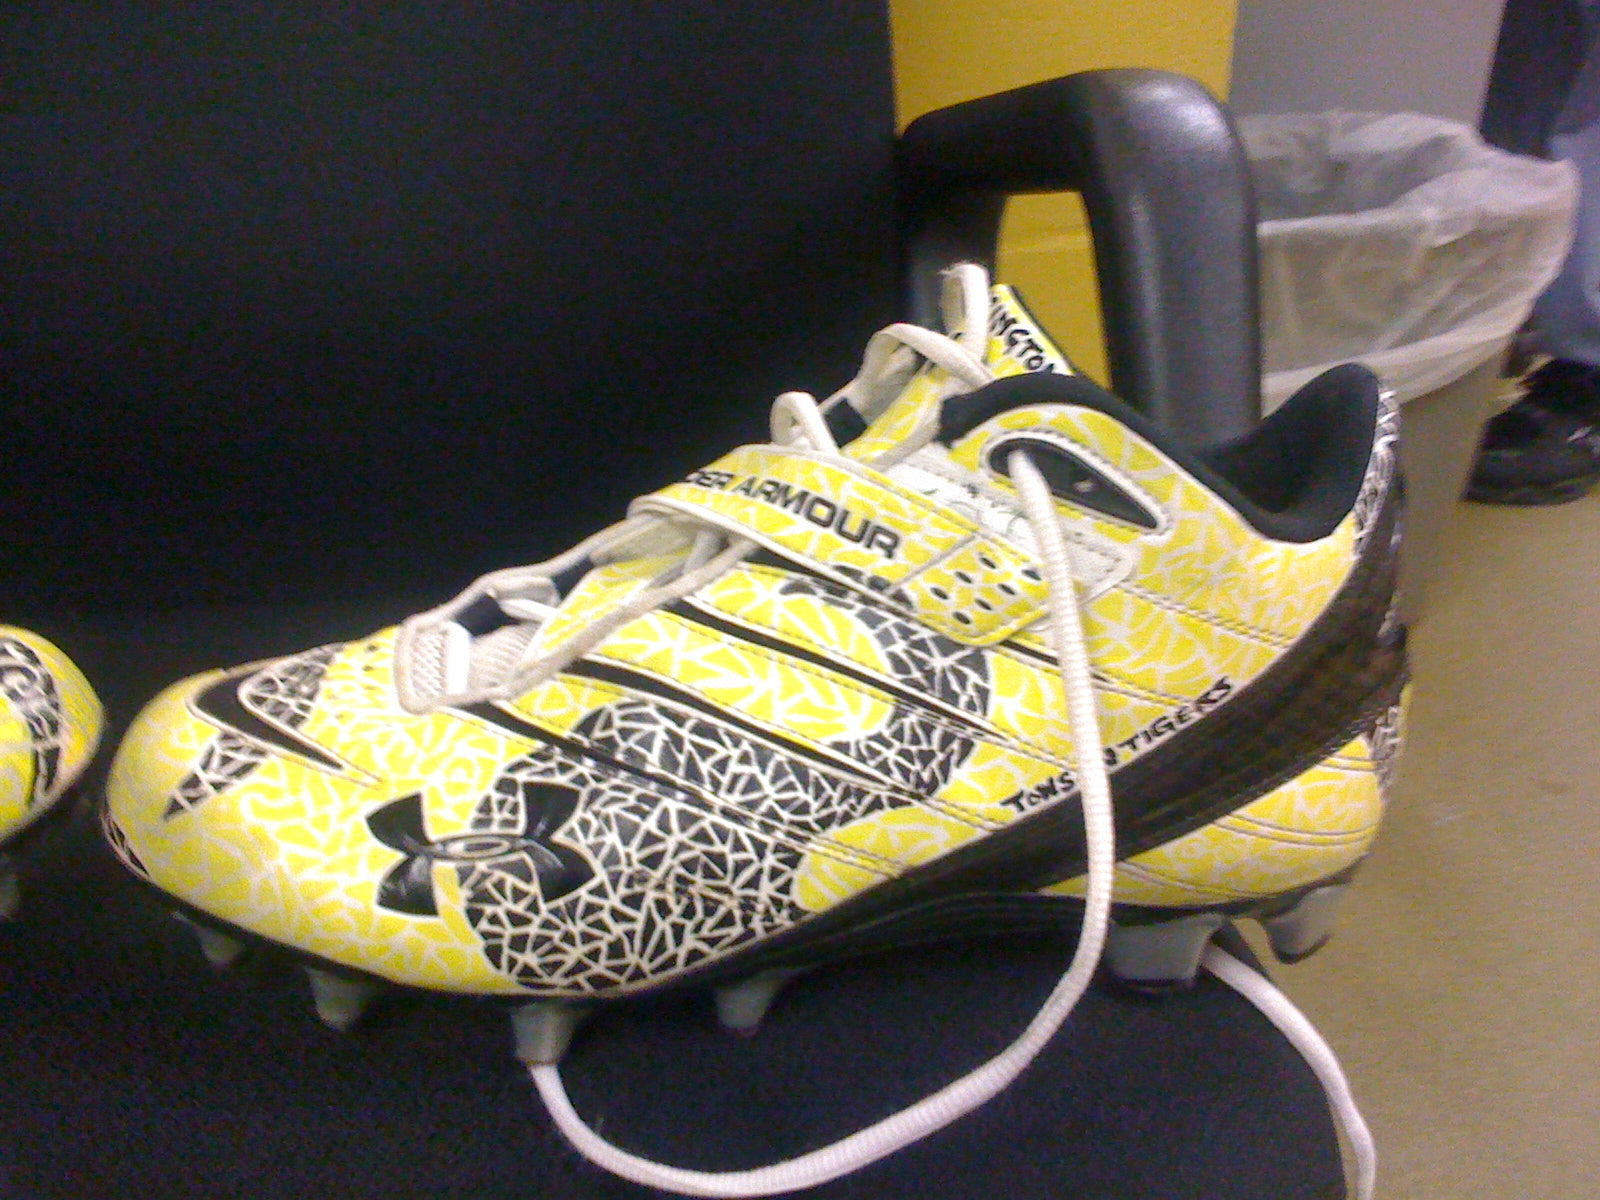 under armour soccer cleats customize